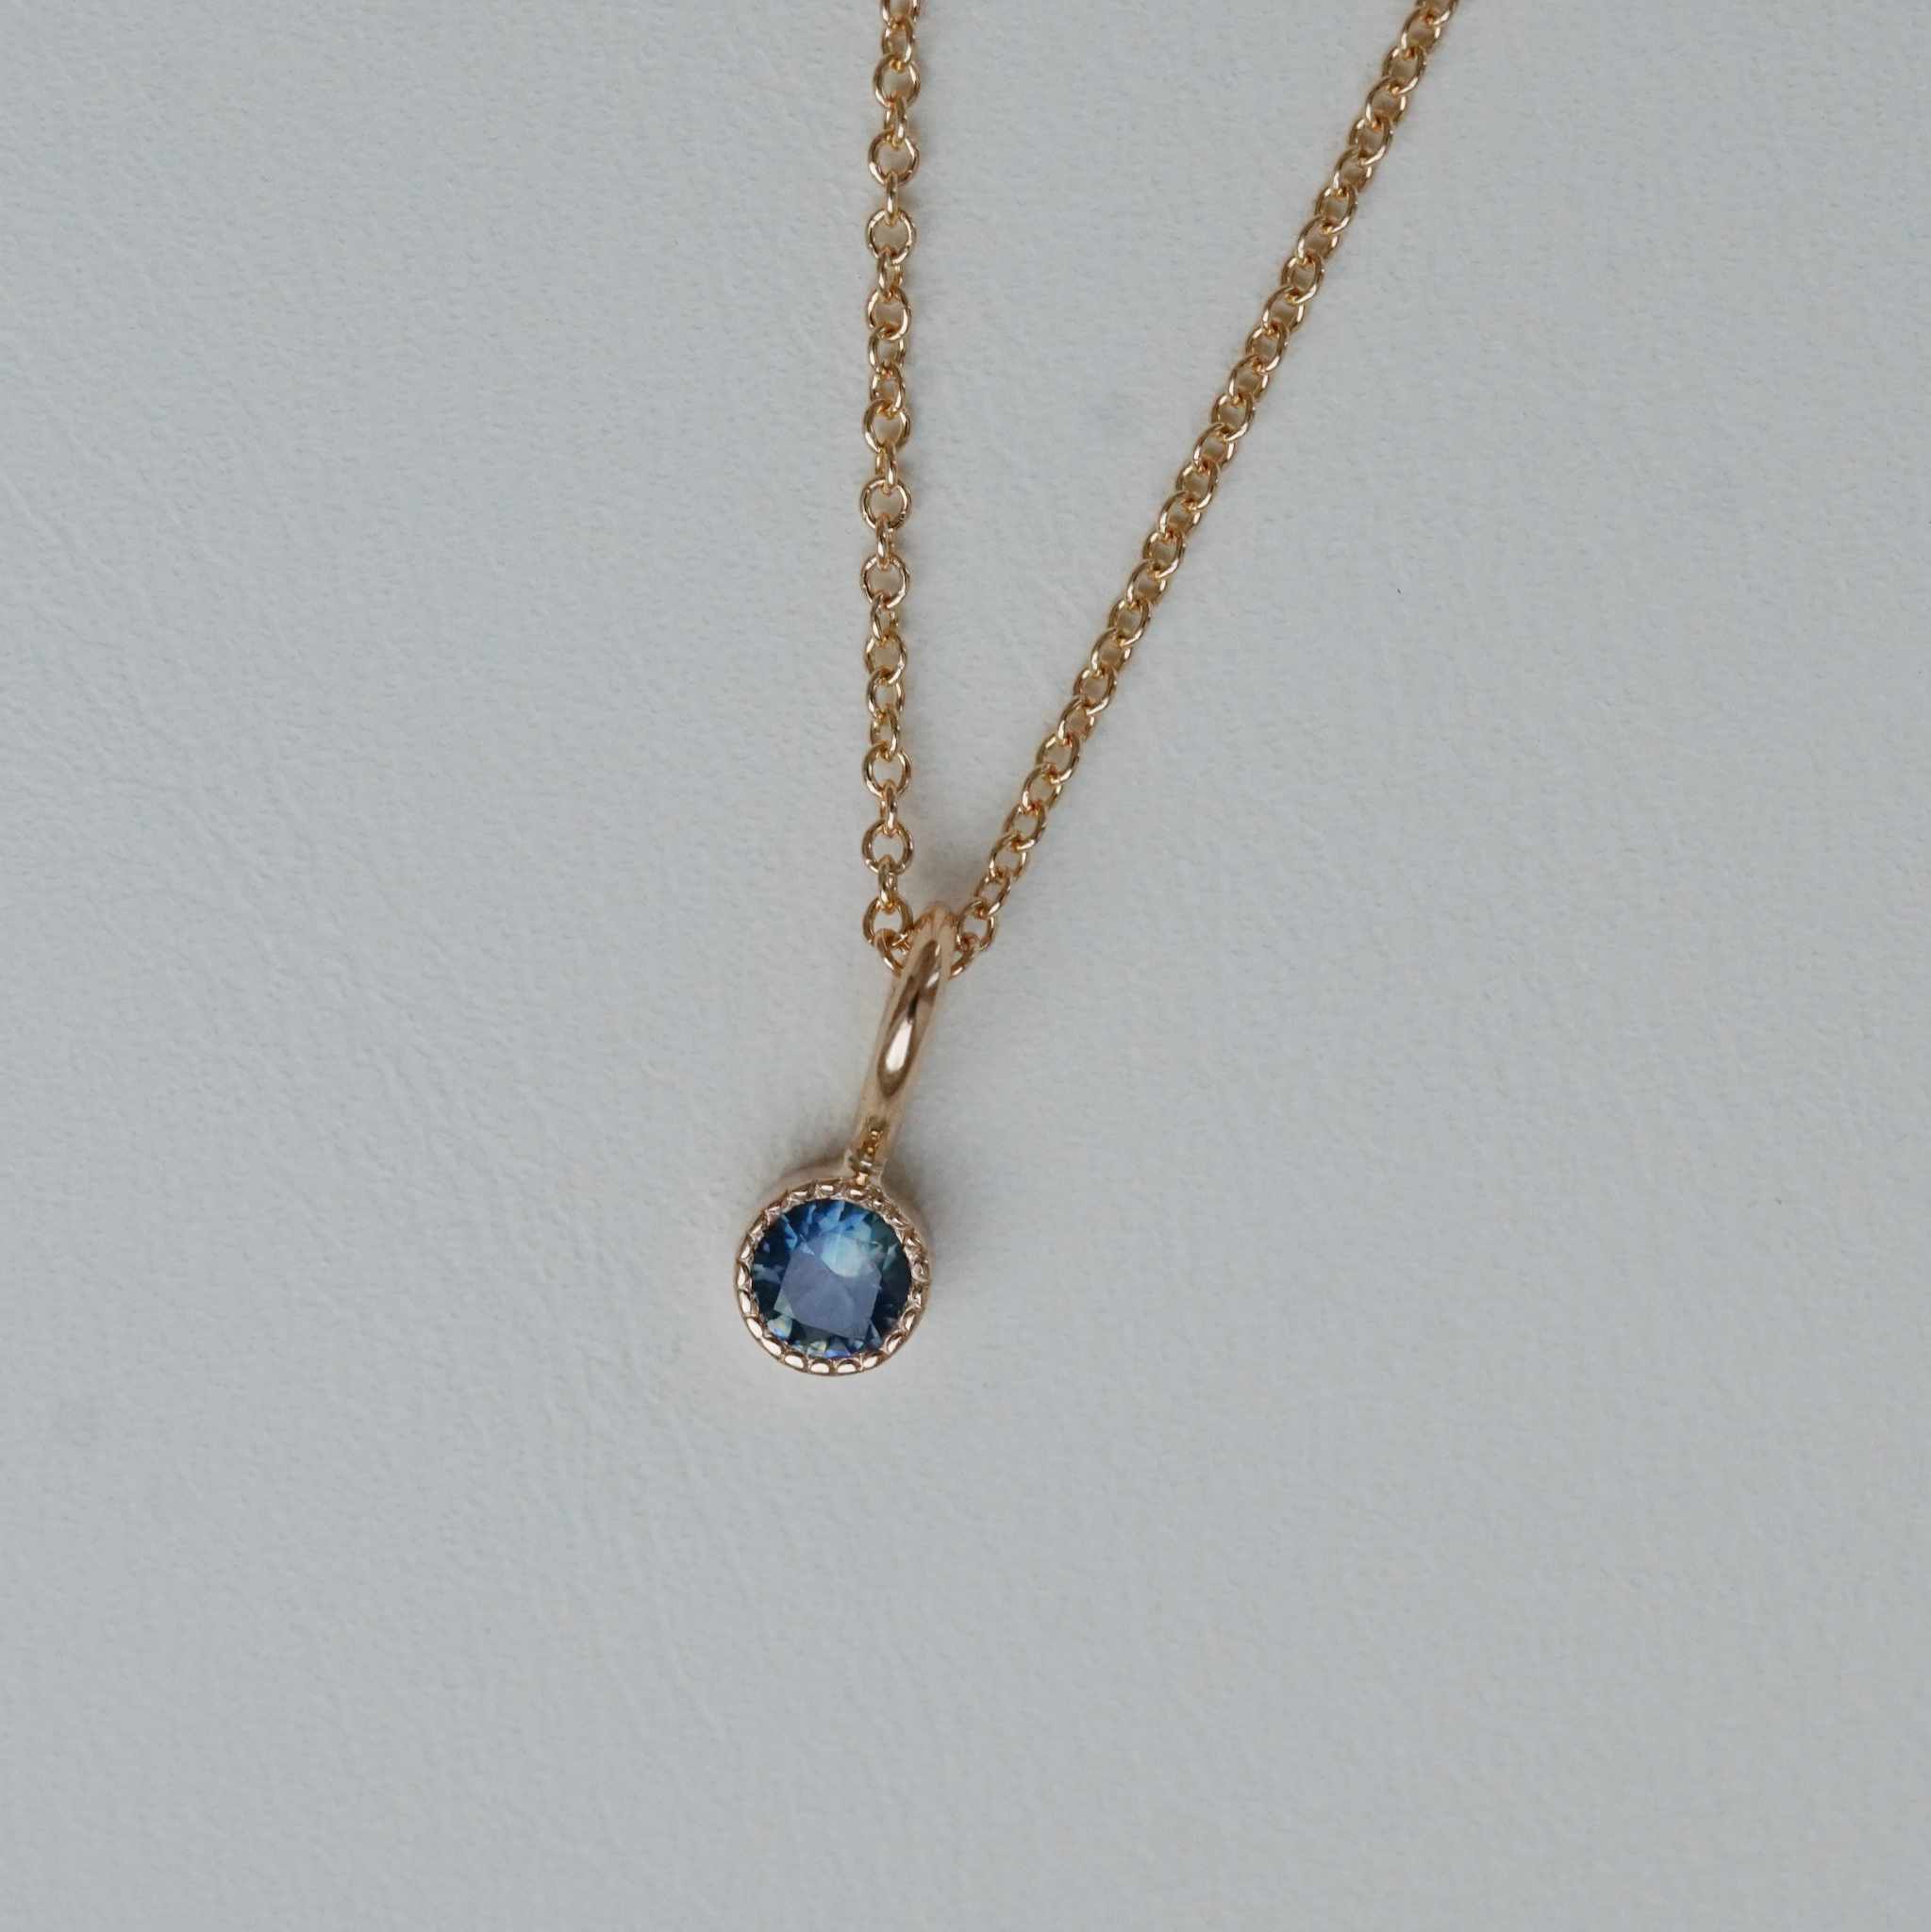 "Twinkle" pendant in gold with a teal sapphire